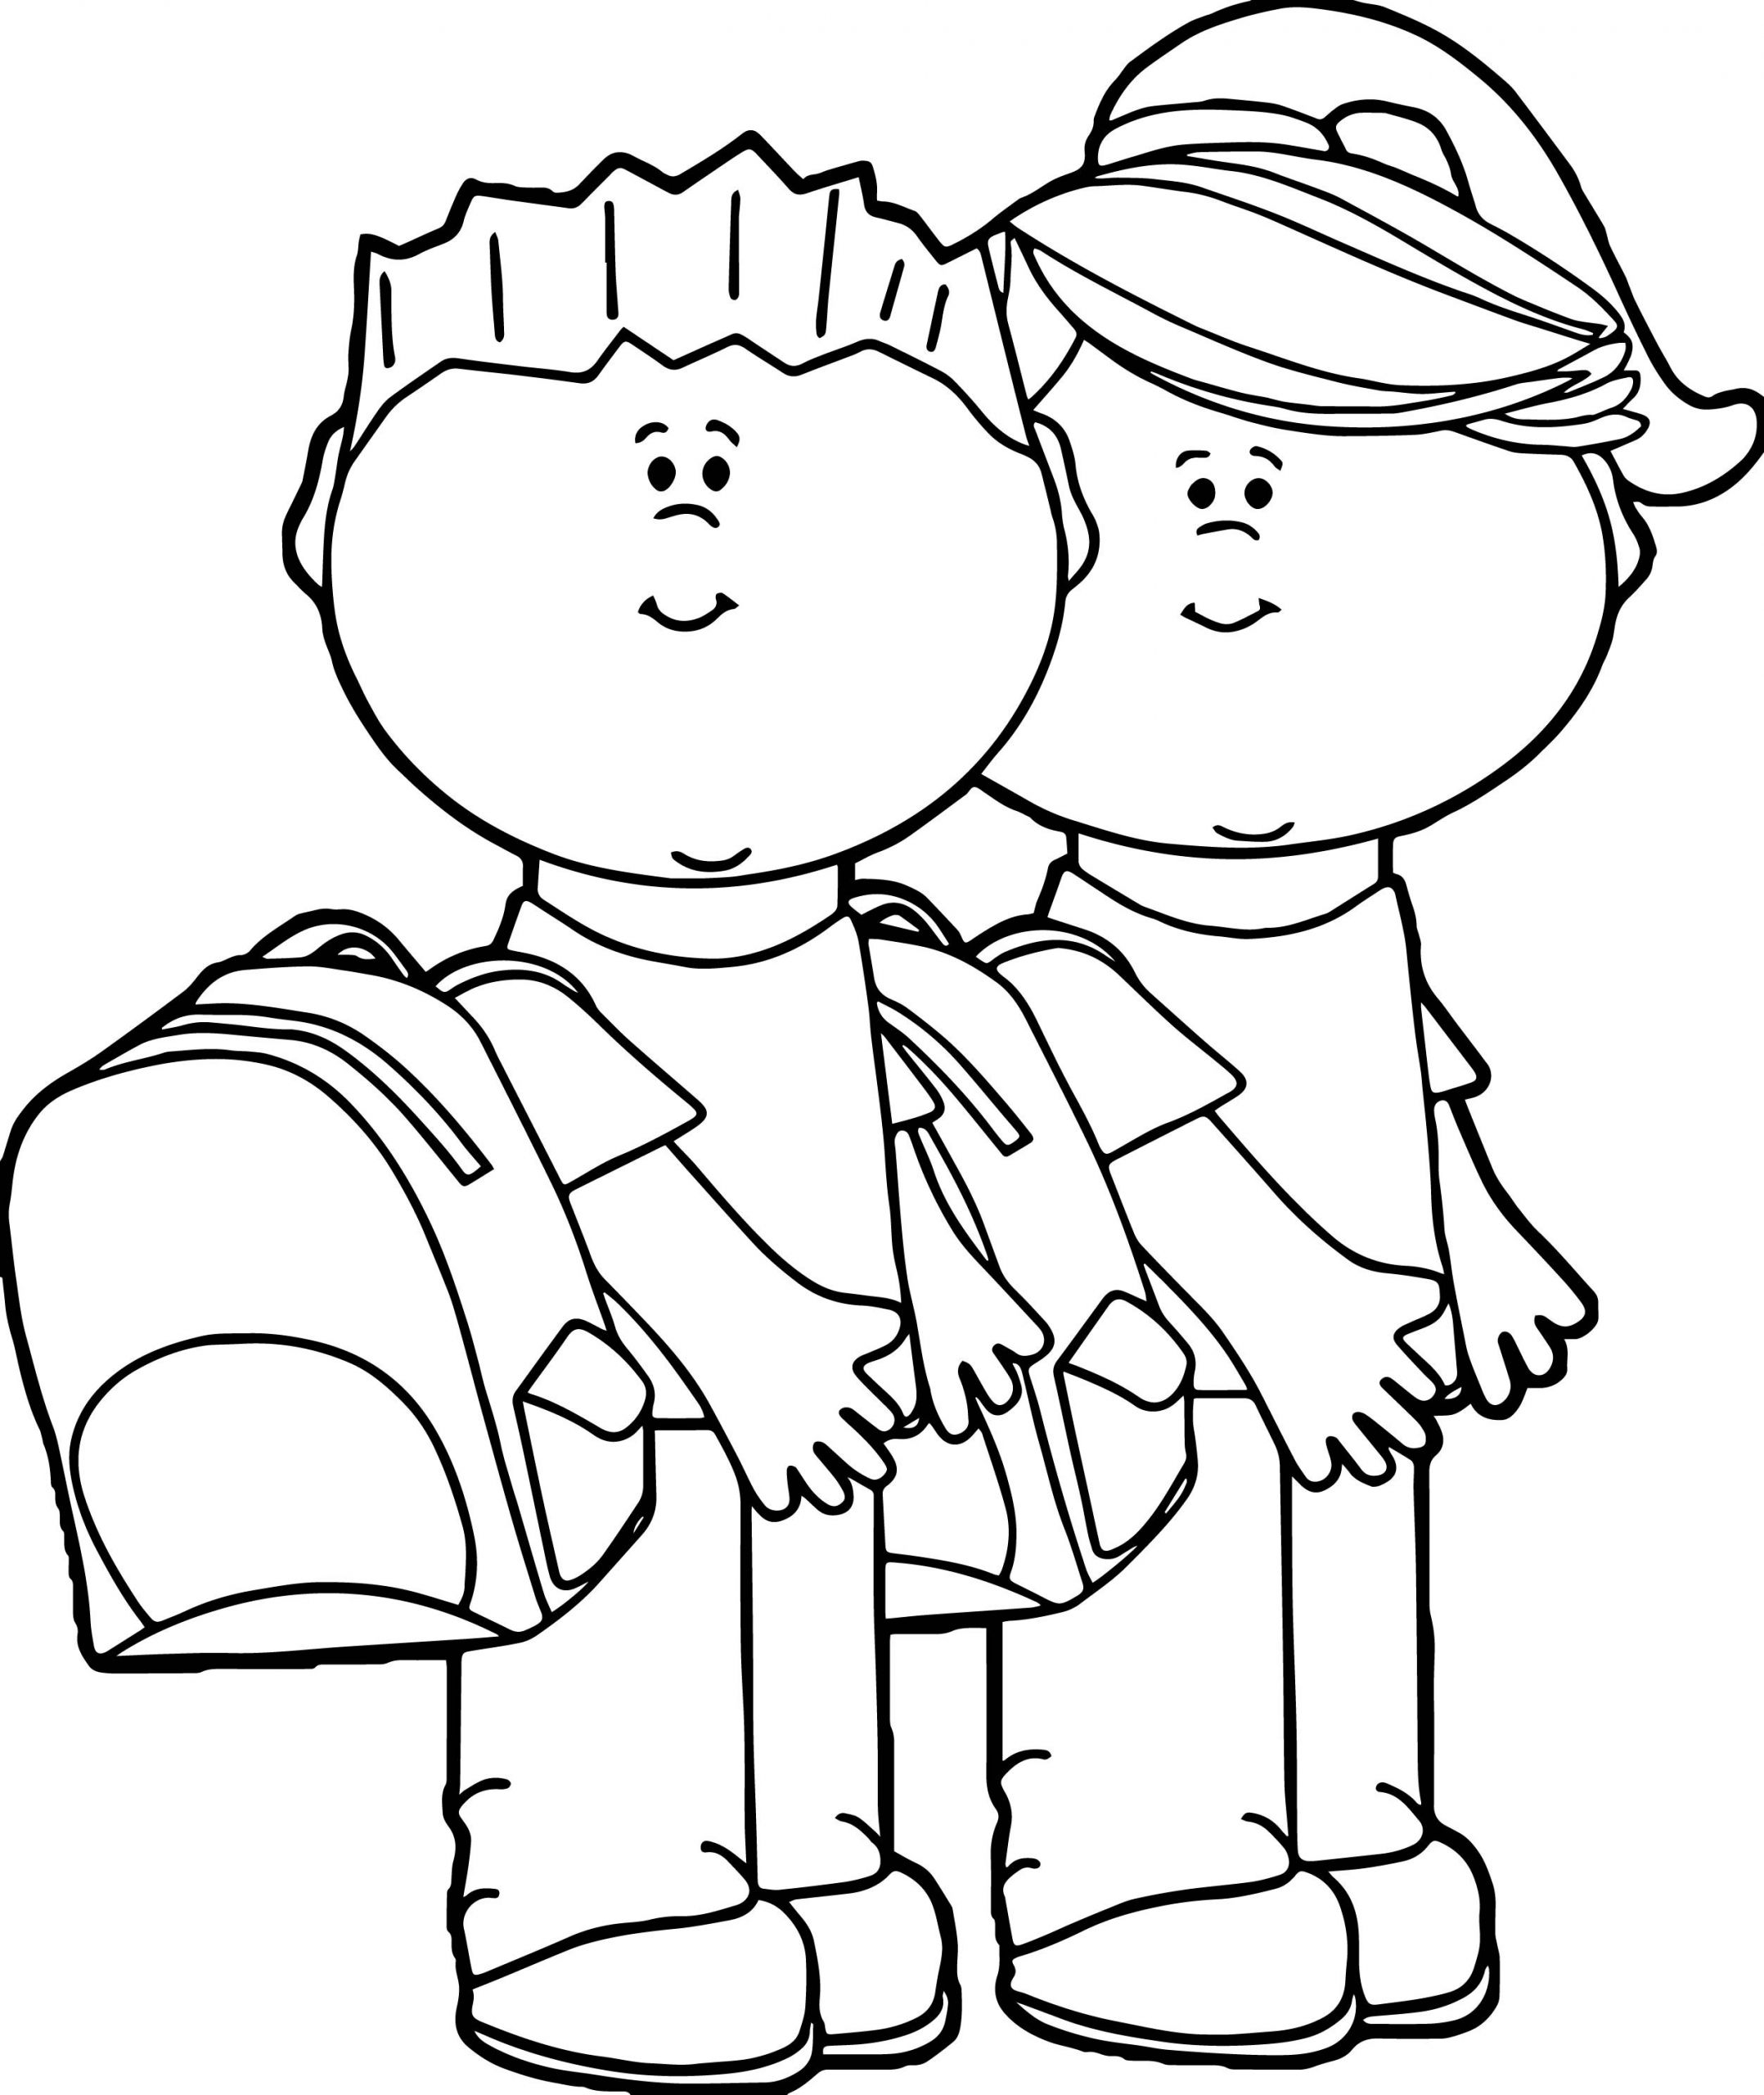 Coloring Sheet For Toddlers
 Kids Going To School Kids Coloring Page